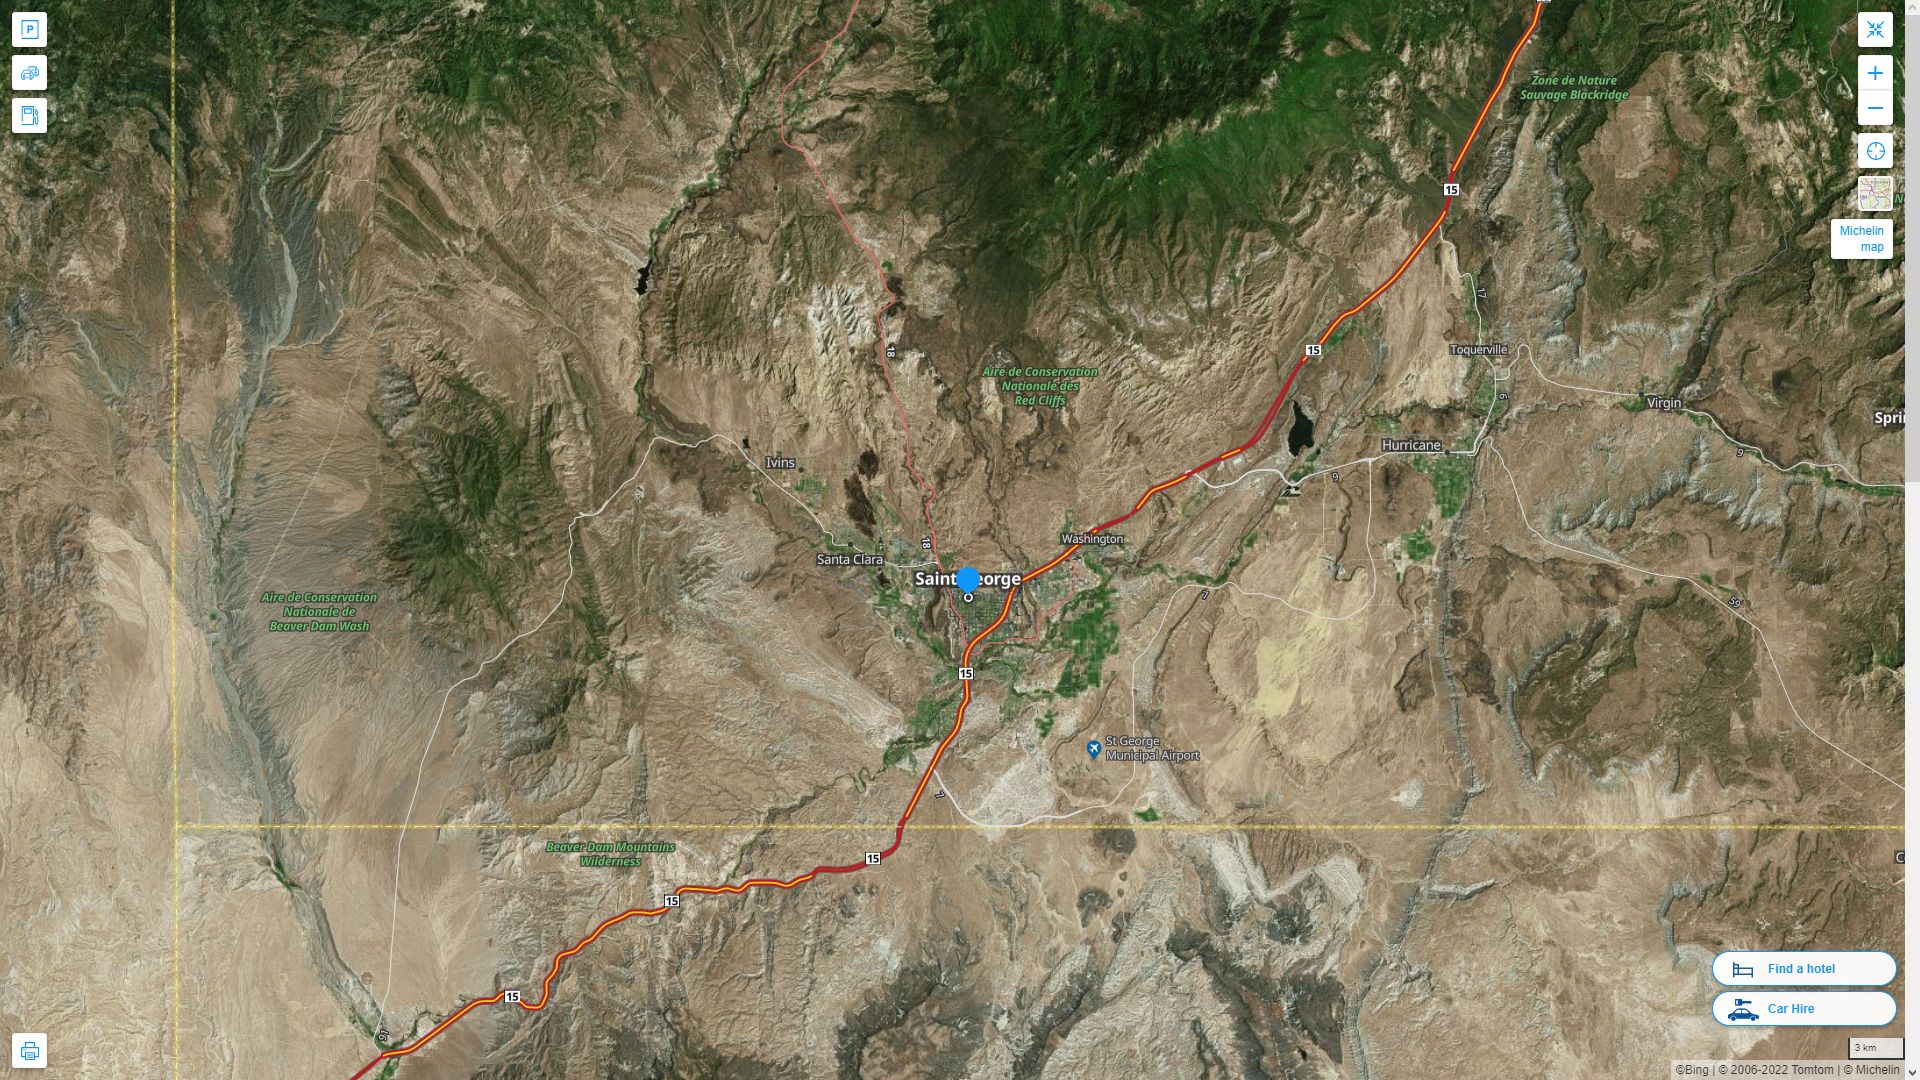 St. George Utah Highway and Road Map with Satellite View